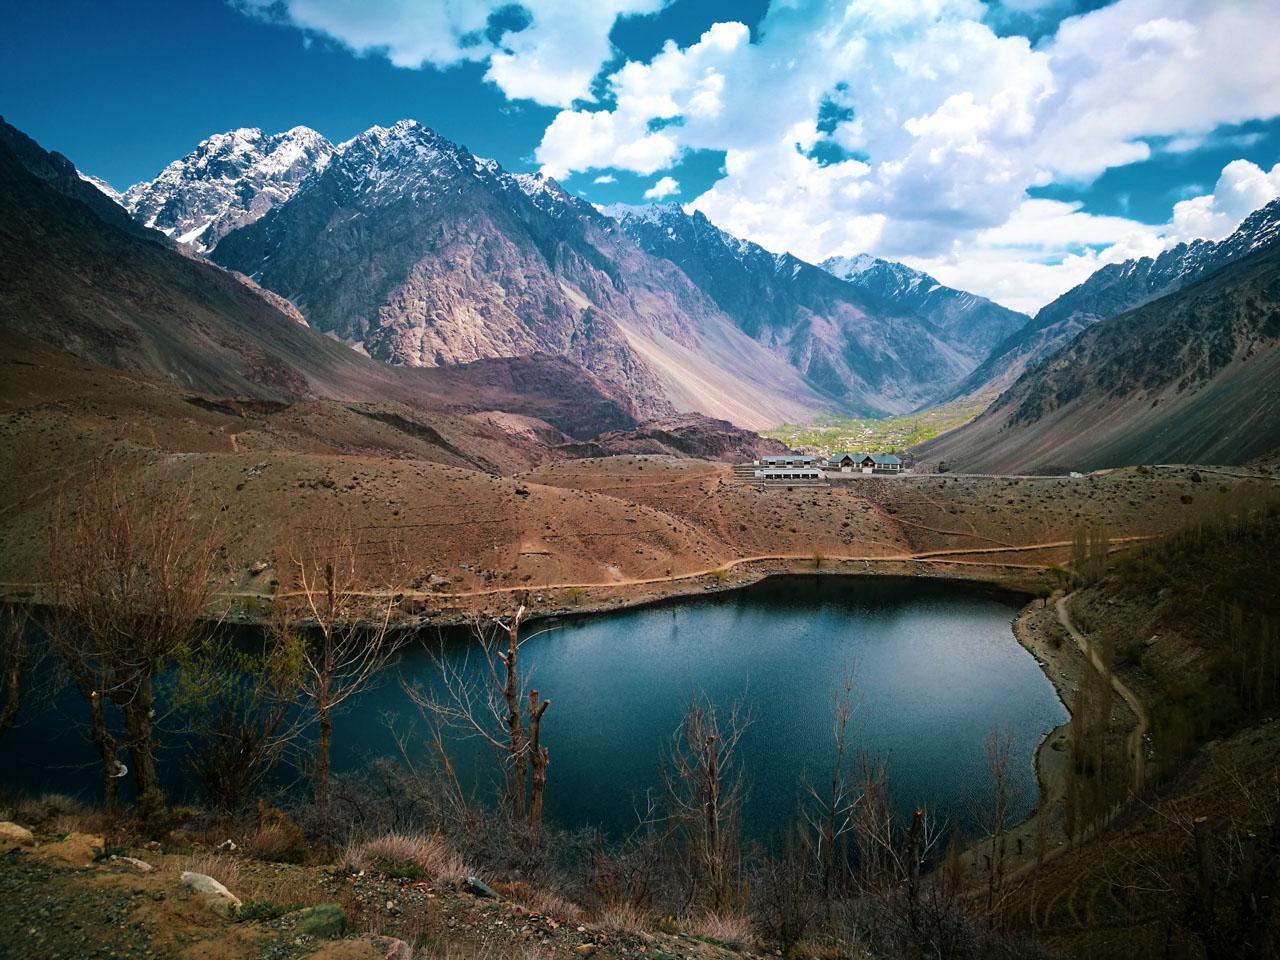 The unrivaled beauty of Phandar Valley augmented by enormous mountains